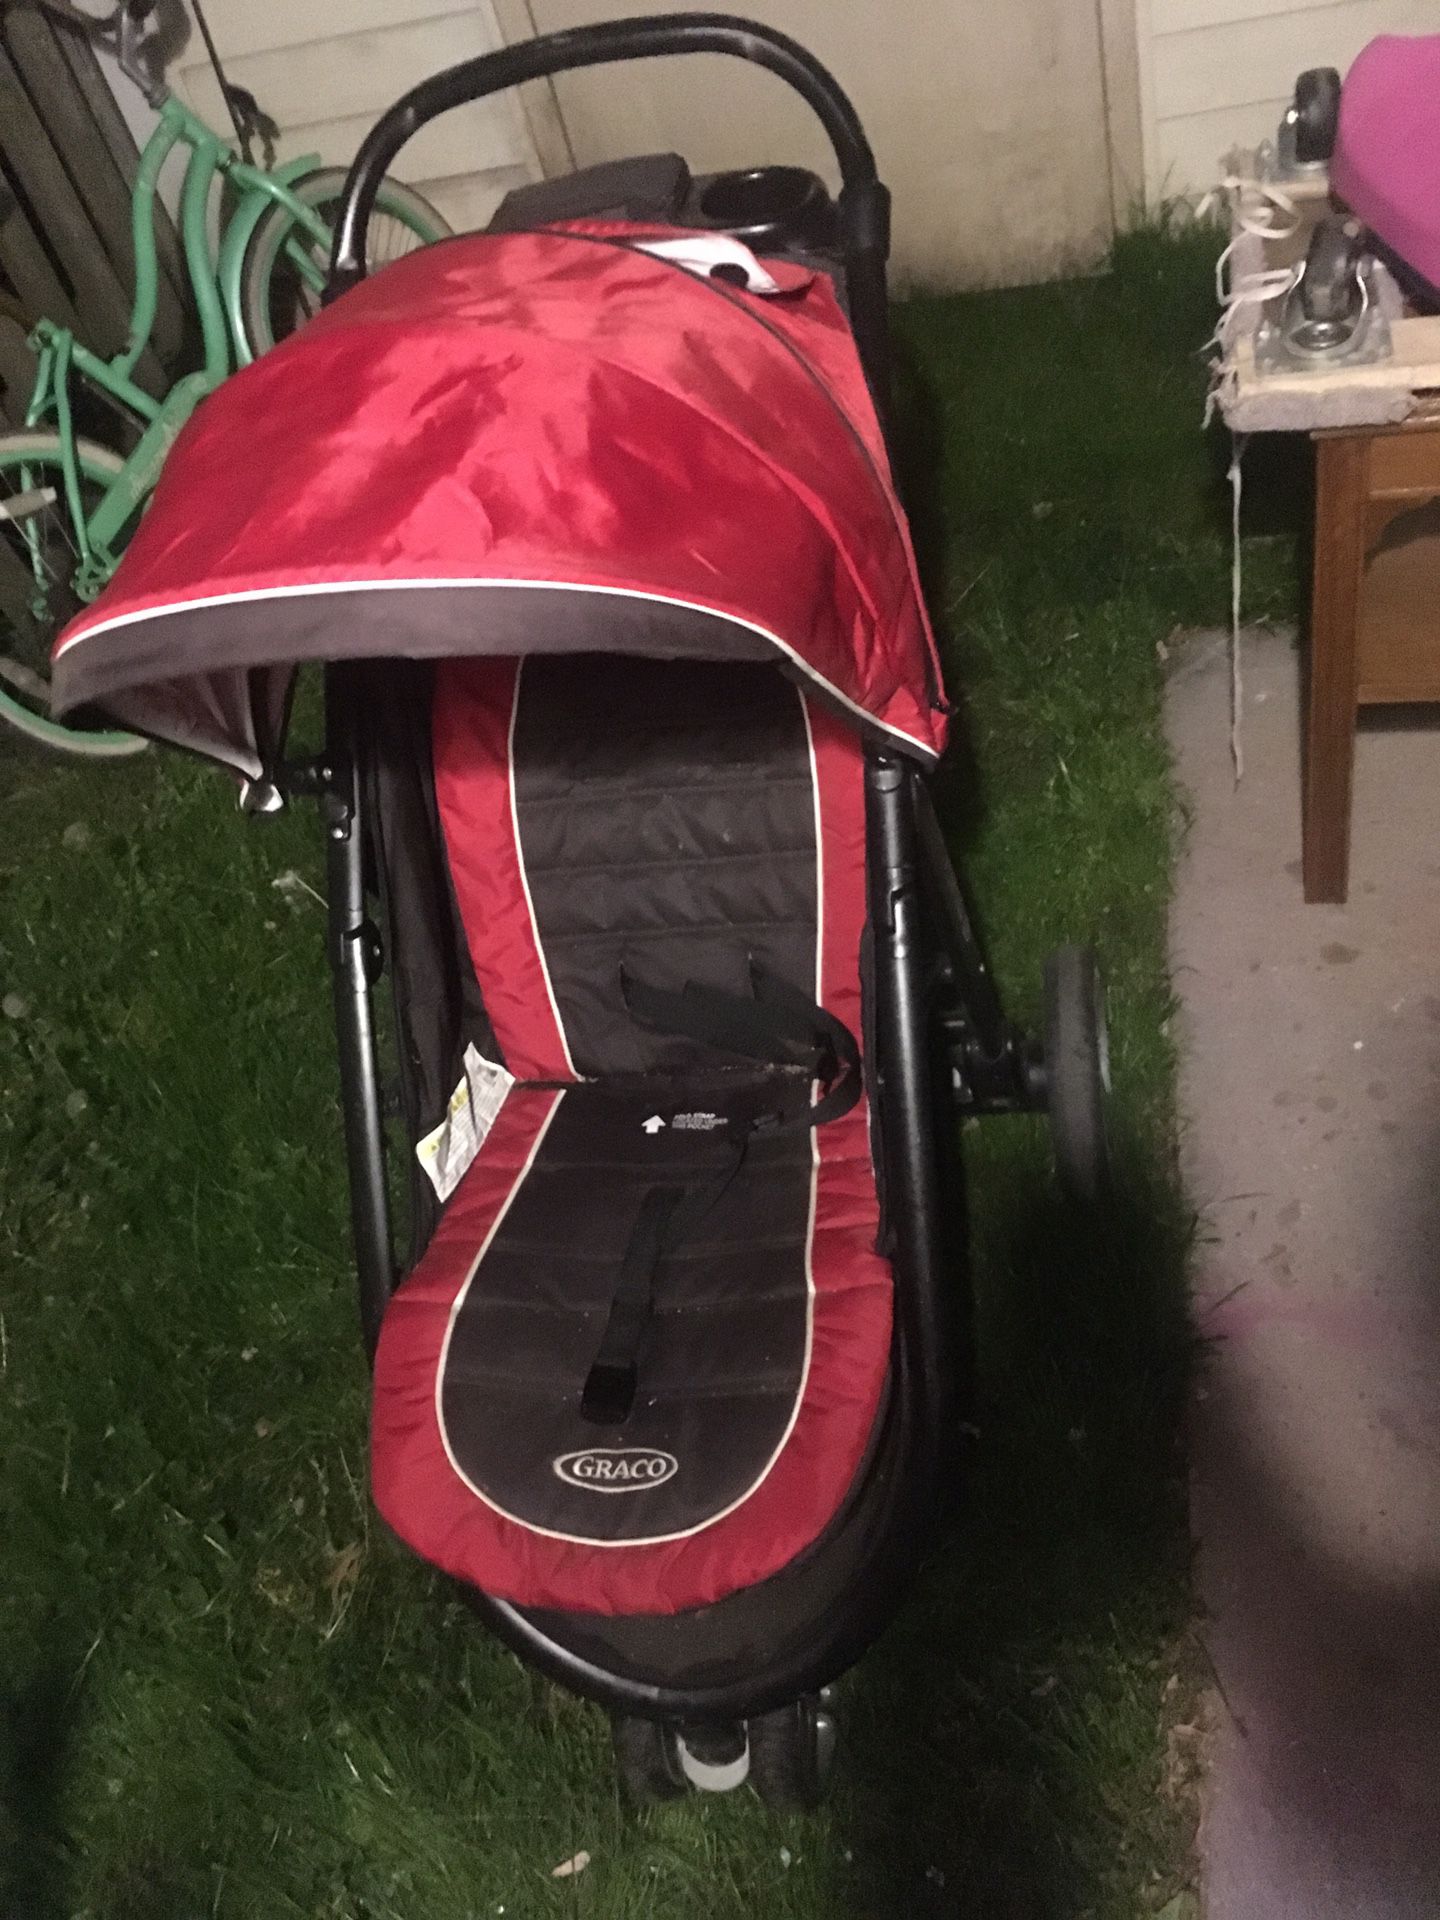 Graco AIRE 3 stroller and infant seat holder.